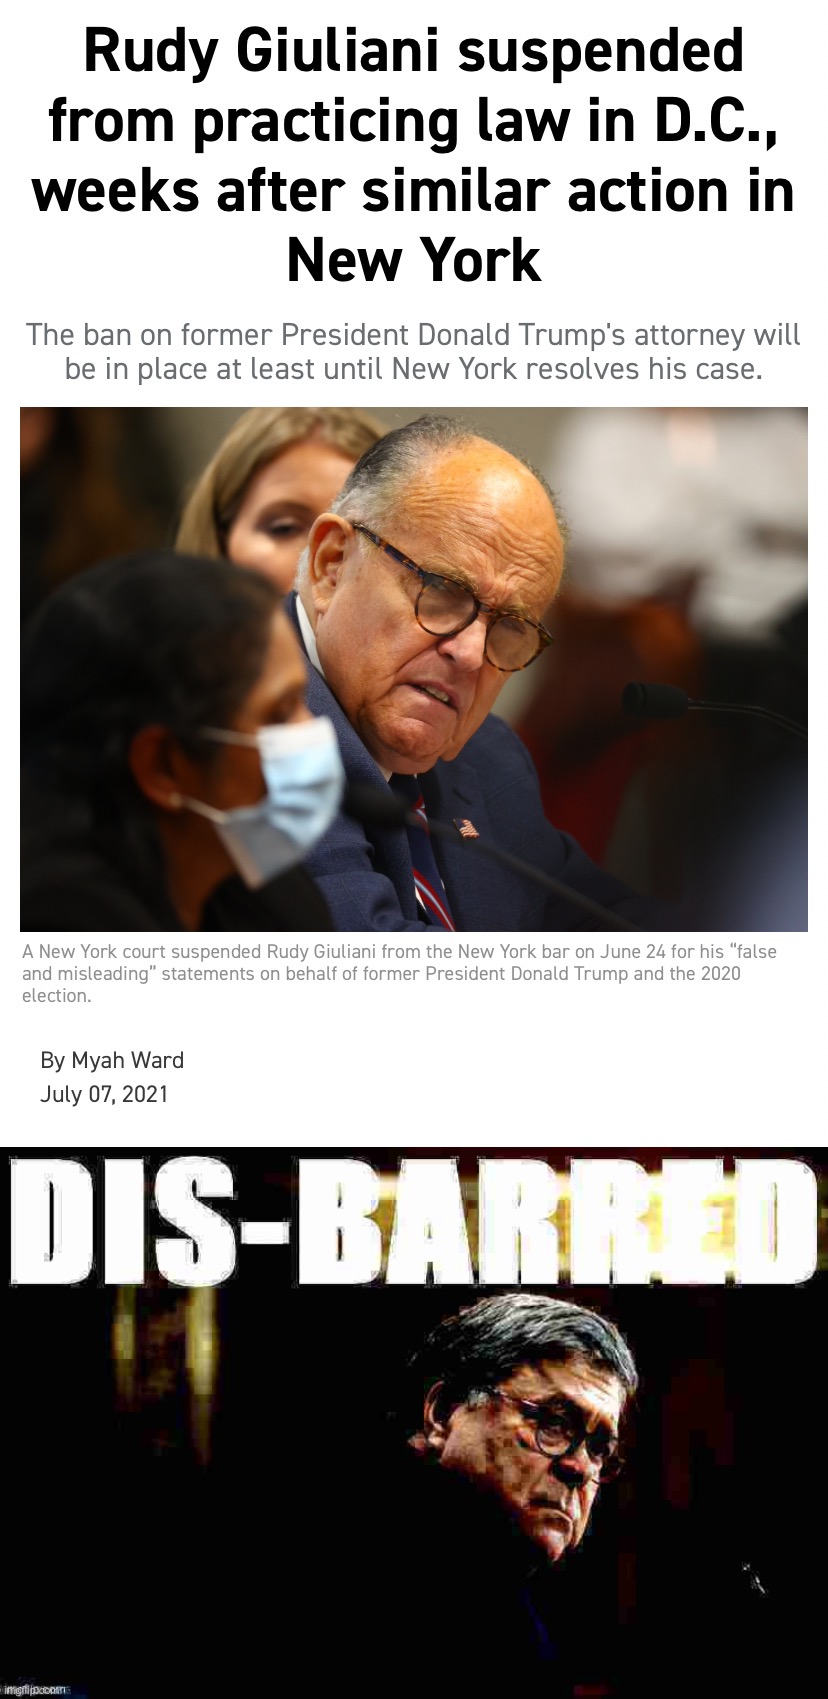 The Leftist railroading of America’s Mayor continues! When will the madness stop??? #MAGA #AmericasMayor #MakeItStop | image tagged in rudy giuliani suspended,william barr disbarred deep-fried,maga,rudy giuliani,giuliani,lawyer | made w/ Imgflip meme maker